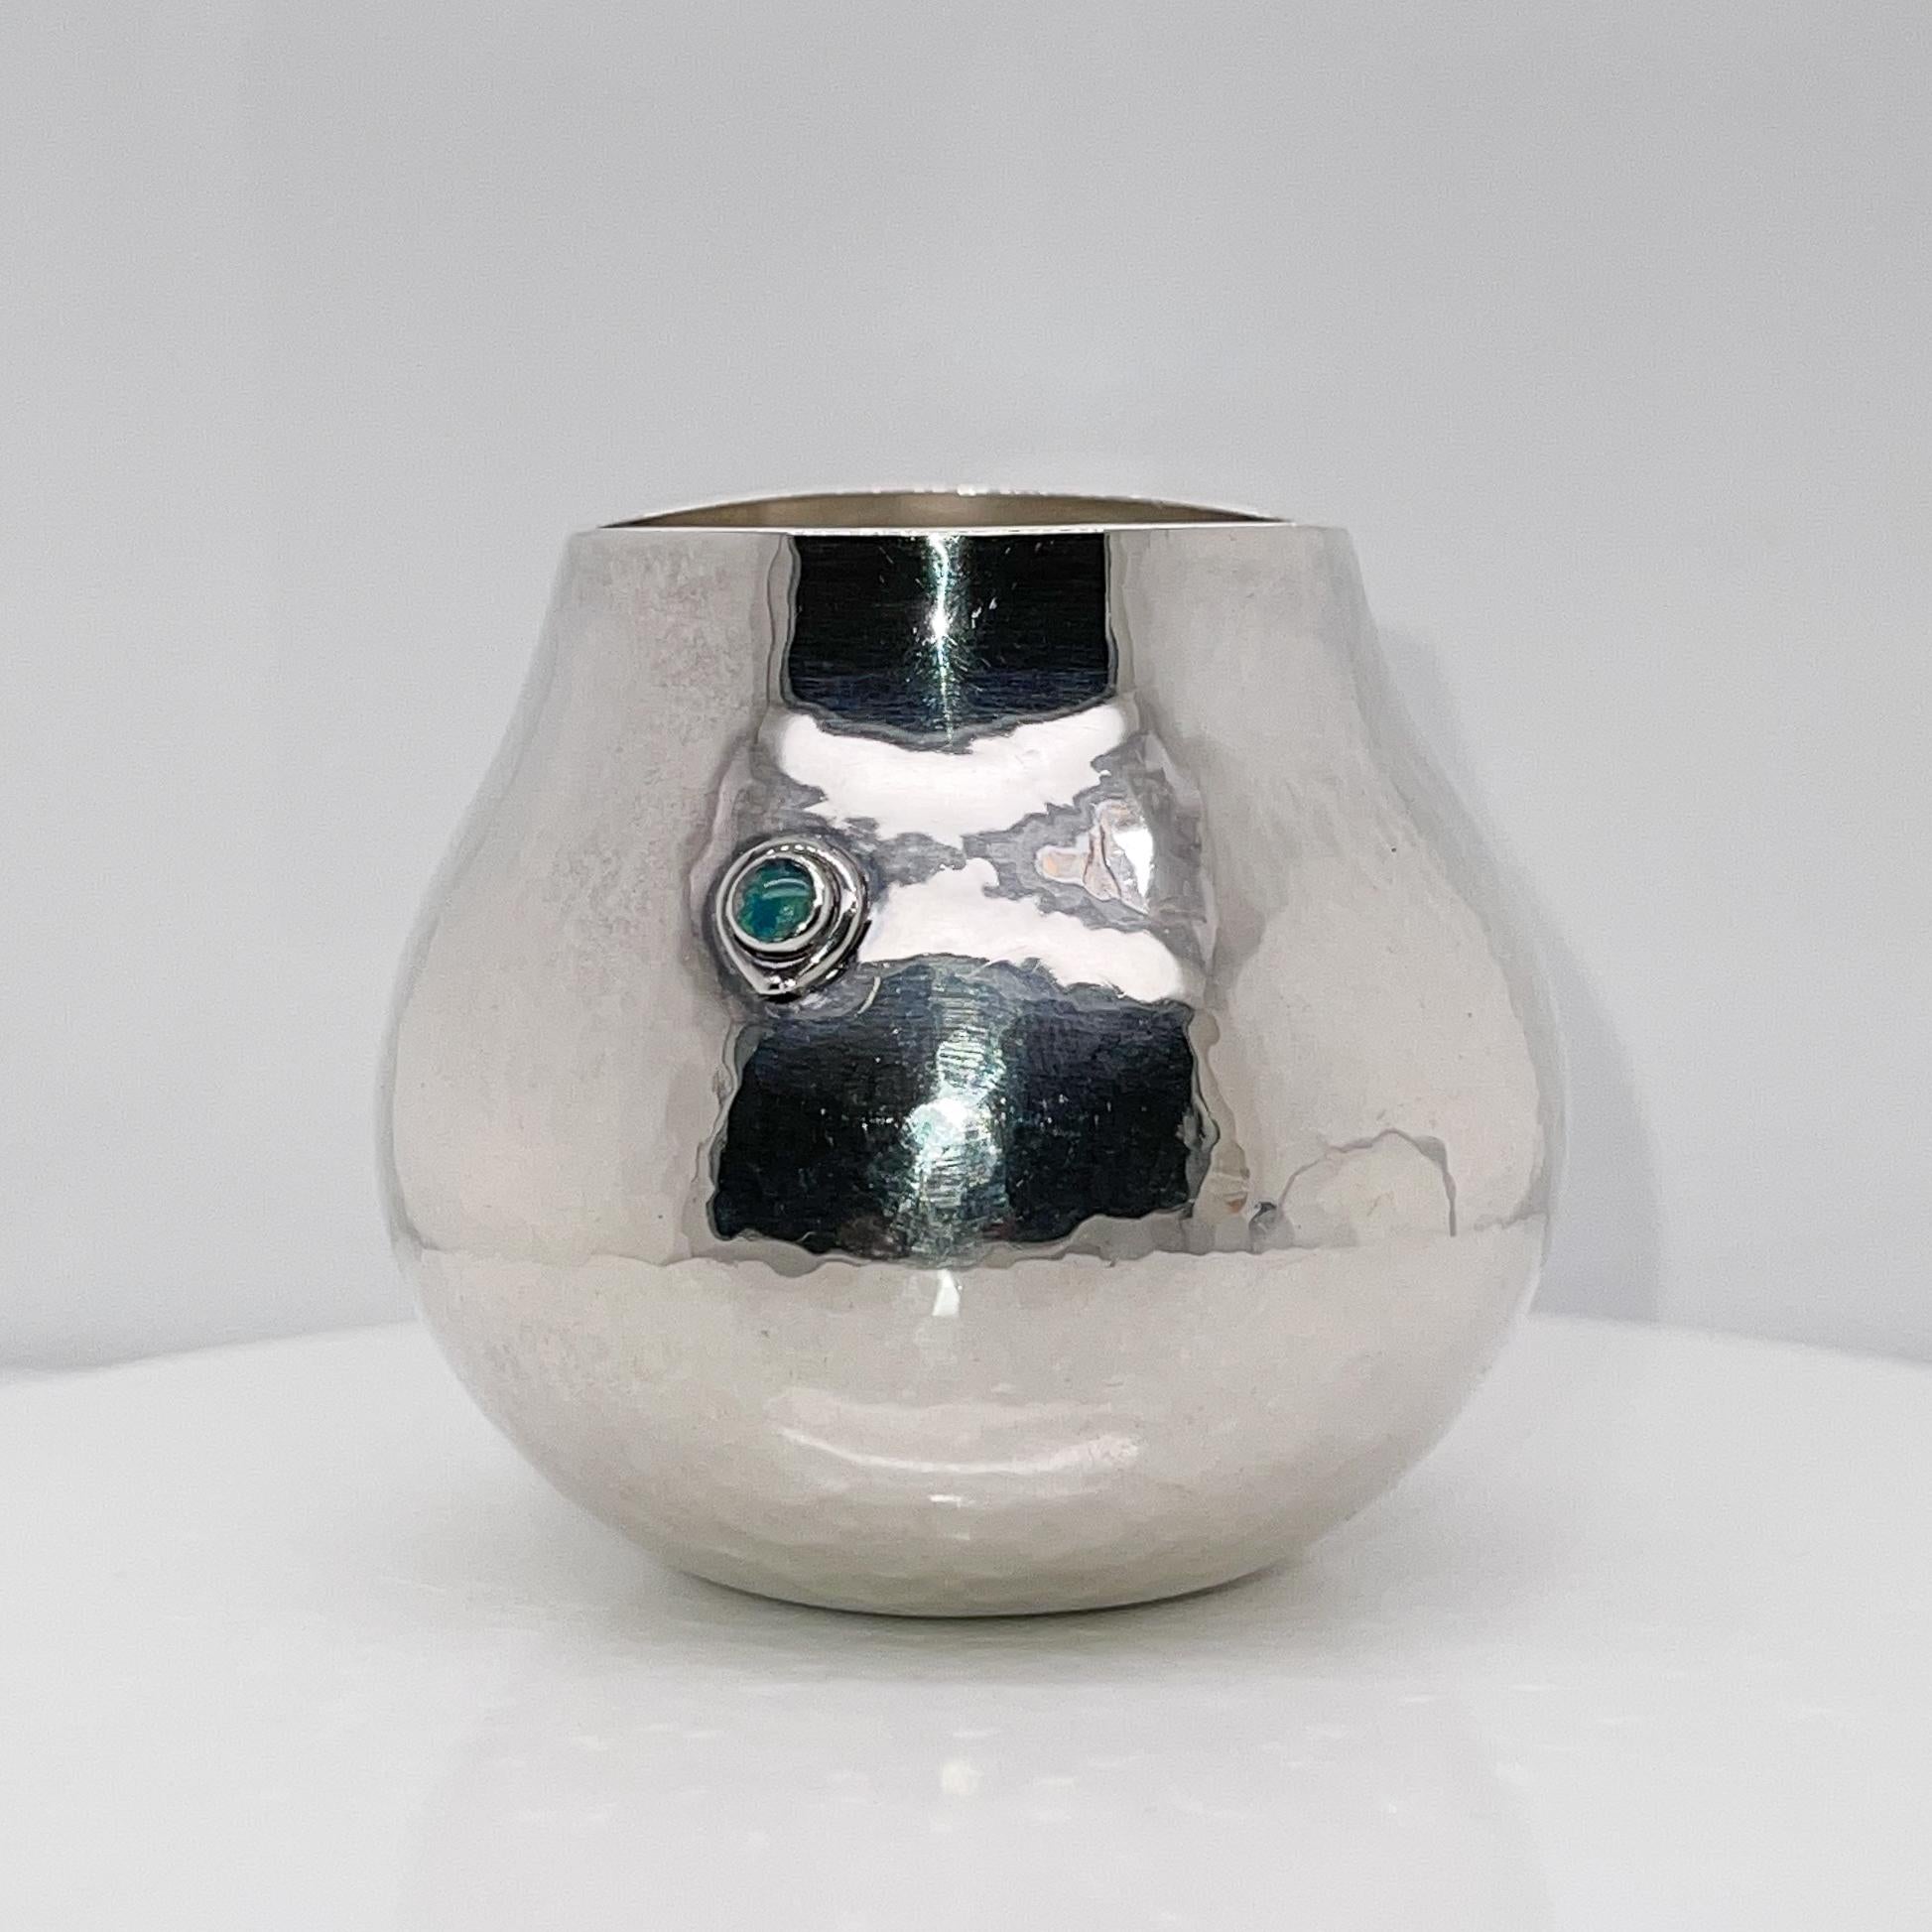 A wonderful 1980's handmade sterling silver vase.

By Kay Ivankovic. 

Kay Ivankovic, the high-level contemporary British silversmith, is known for her flowing, organic forms. 

This hand-chased vase has a bezel-set opal at its center and a